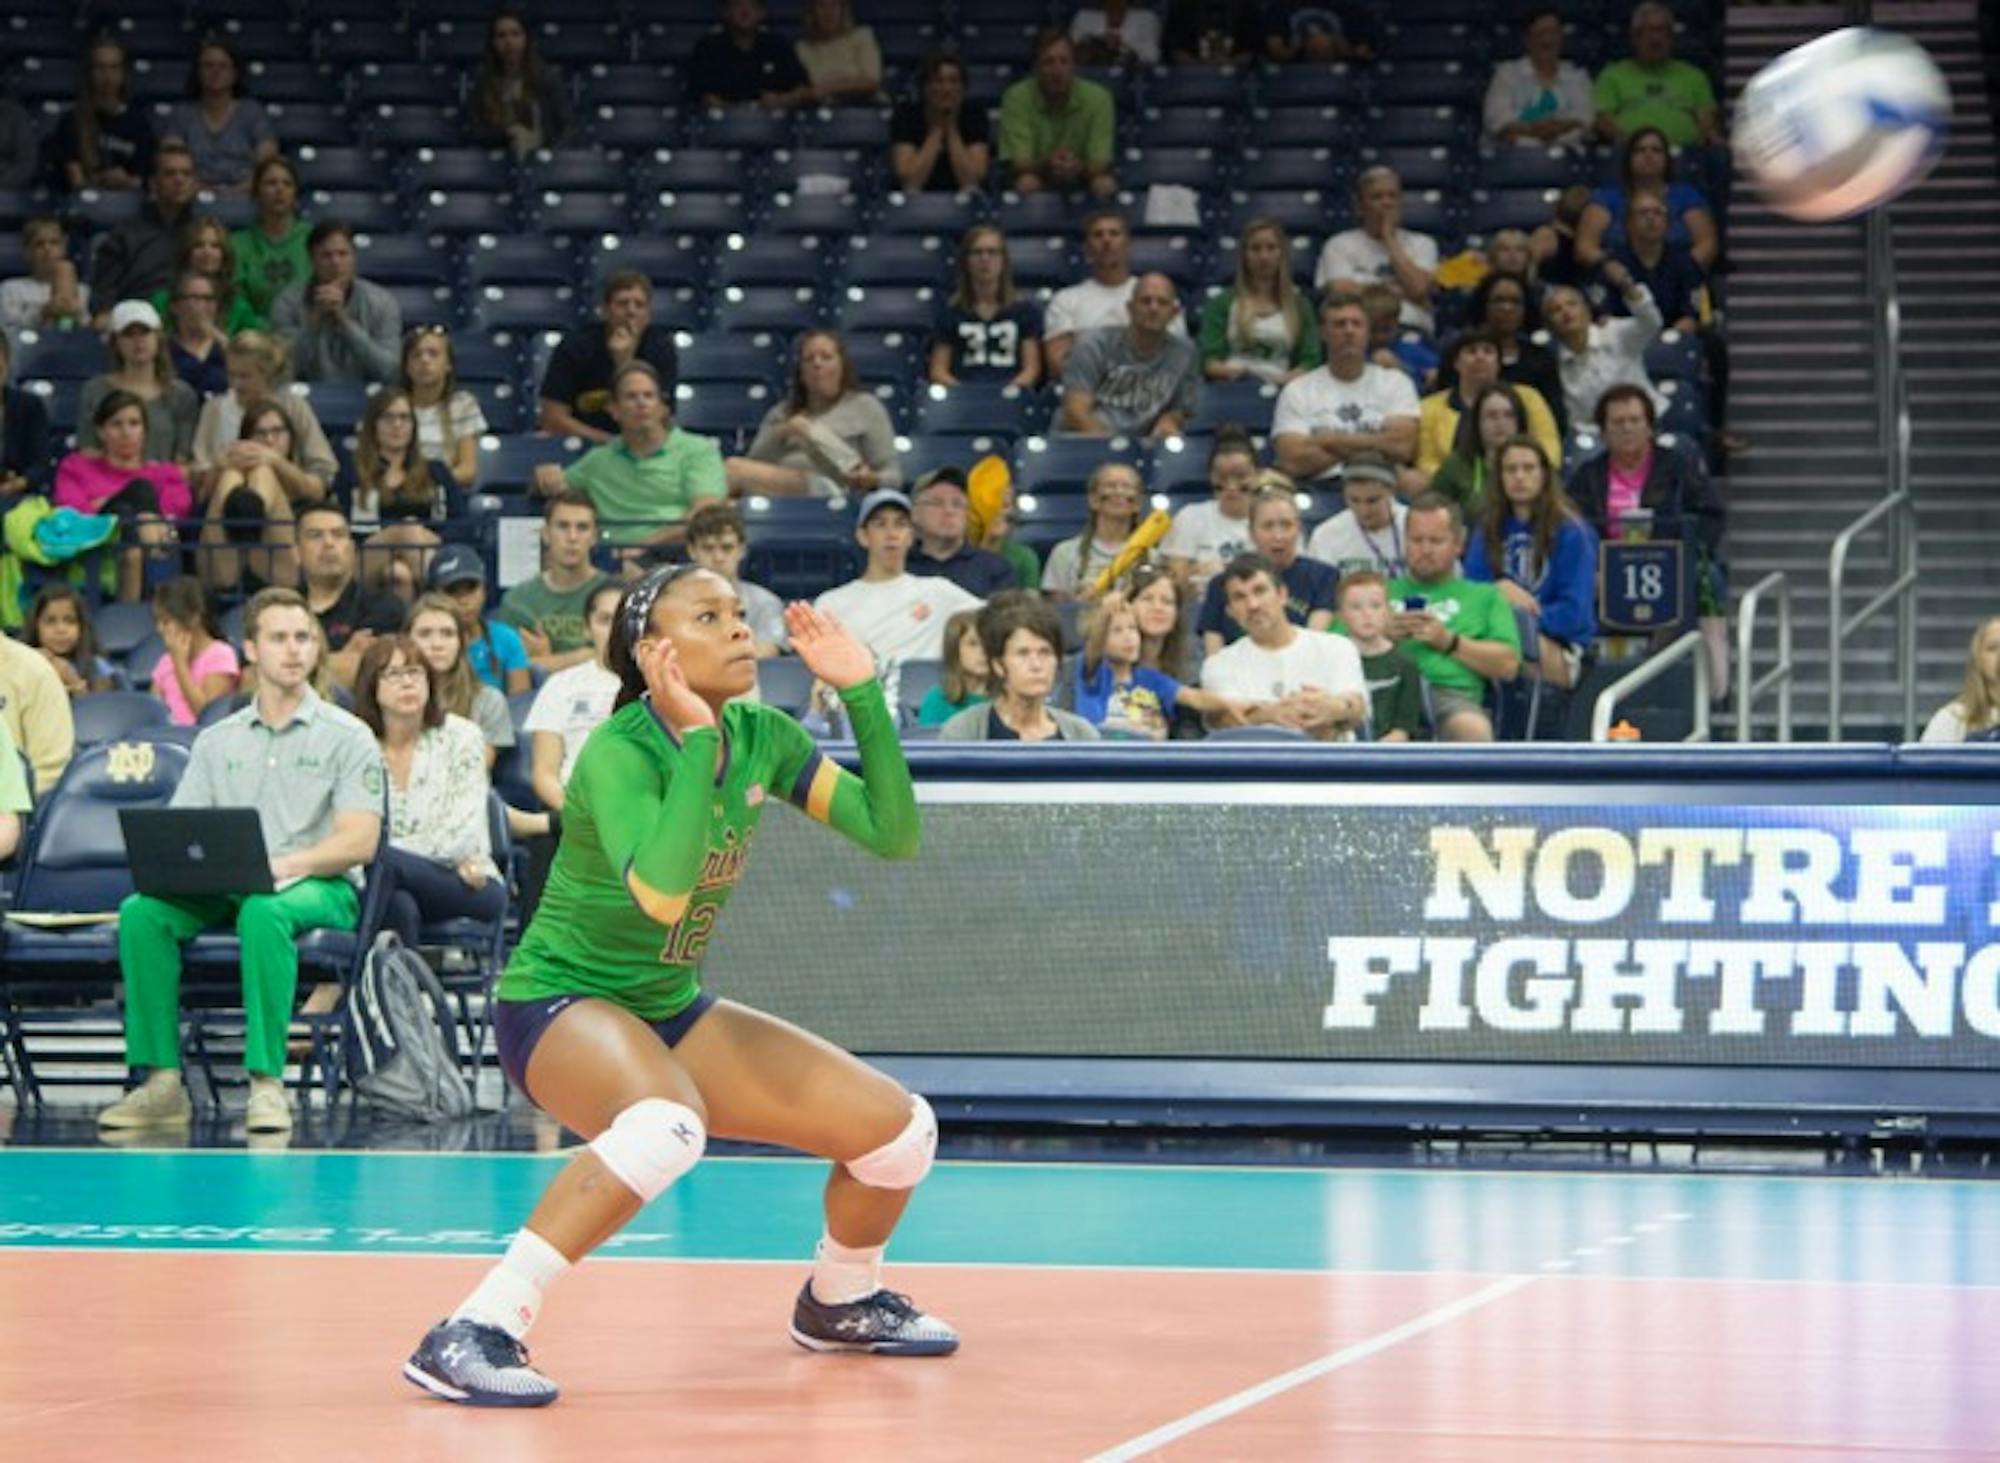 Irish freshman outside hitter Jemma Yeadon eyes the ball during Notre Dame’s 3-0 win against Western Michigan at Purcell Pavilion. Yeadon made her first collegiate appearance in Saturday’s match against Cleveland State and finished with 16 total kills against the two teams.